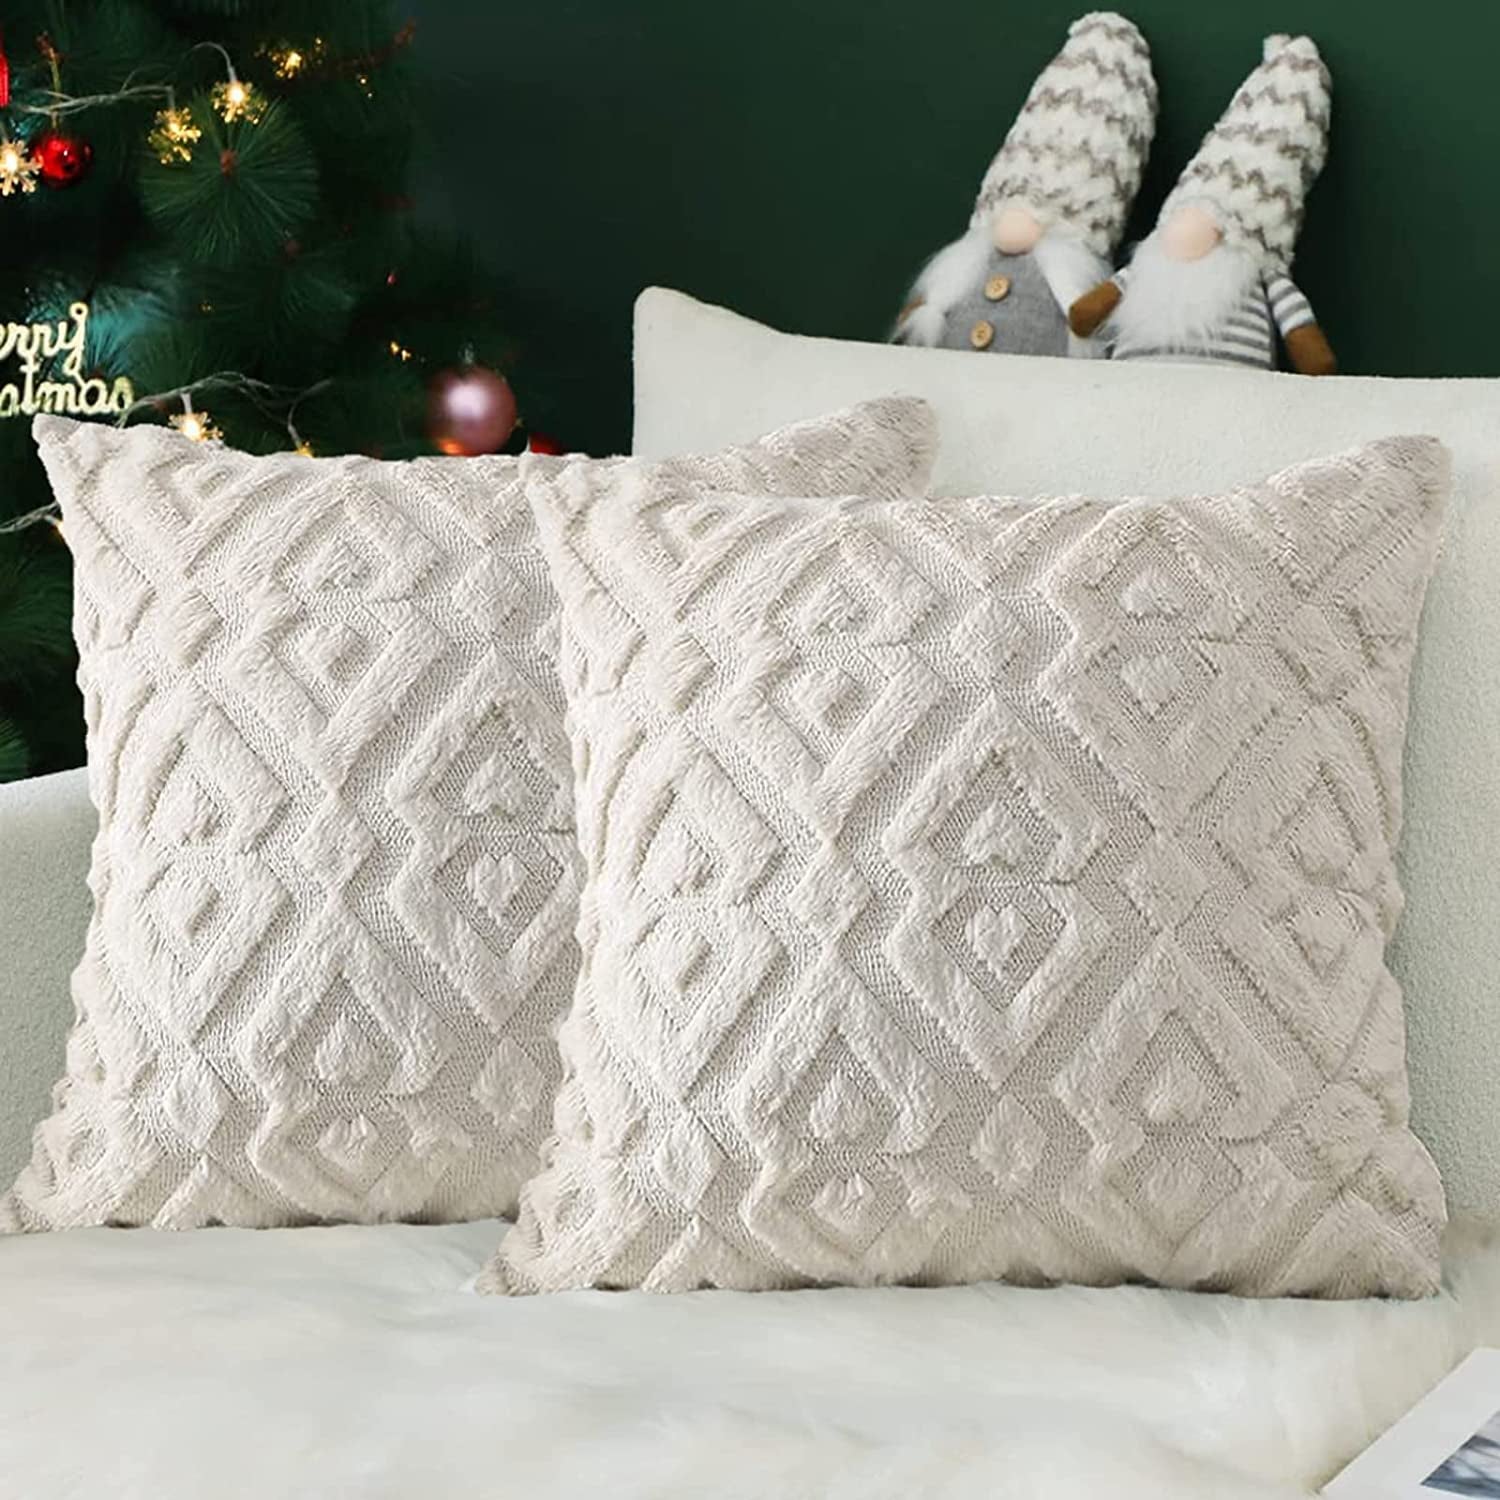 "Fluffy Clouds of Comfort: Double Trouble Softie Pillow Covers - The Ultimate Snuggle Buddies for your Sofa, Bed, or even your Car! (Color: Yawn-inducing Beige)"